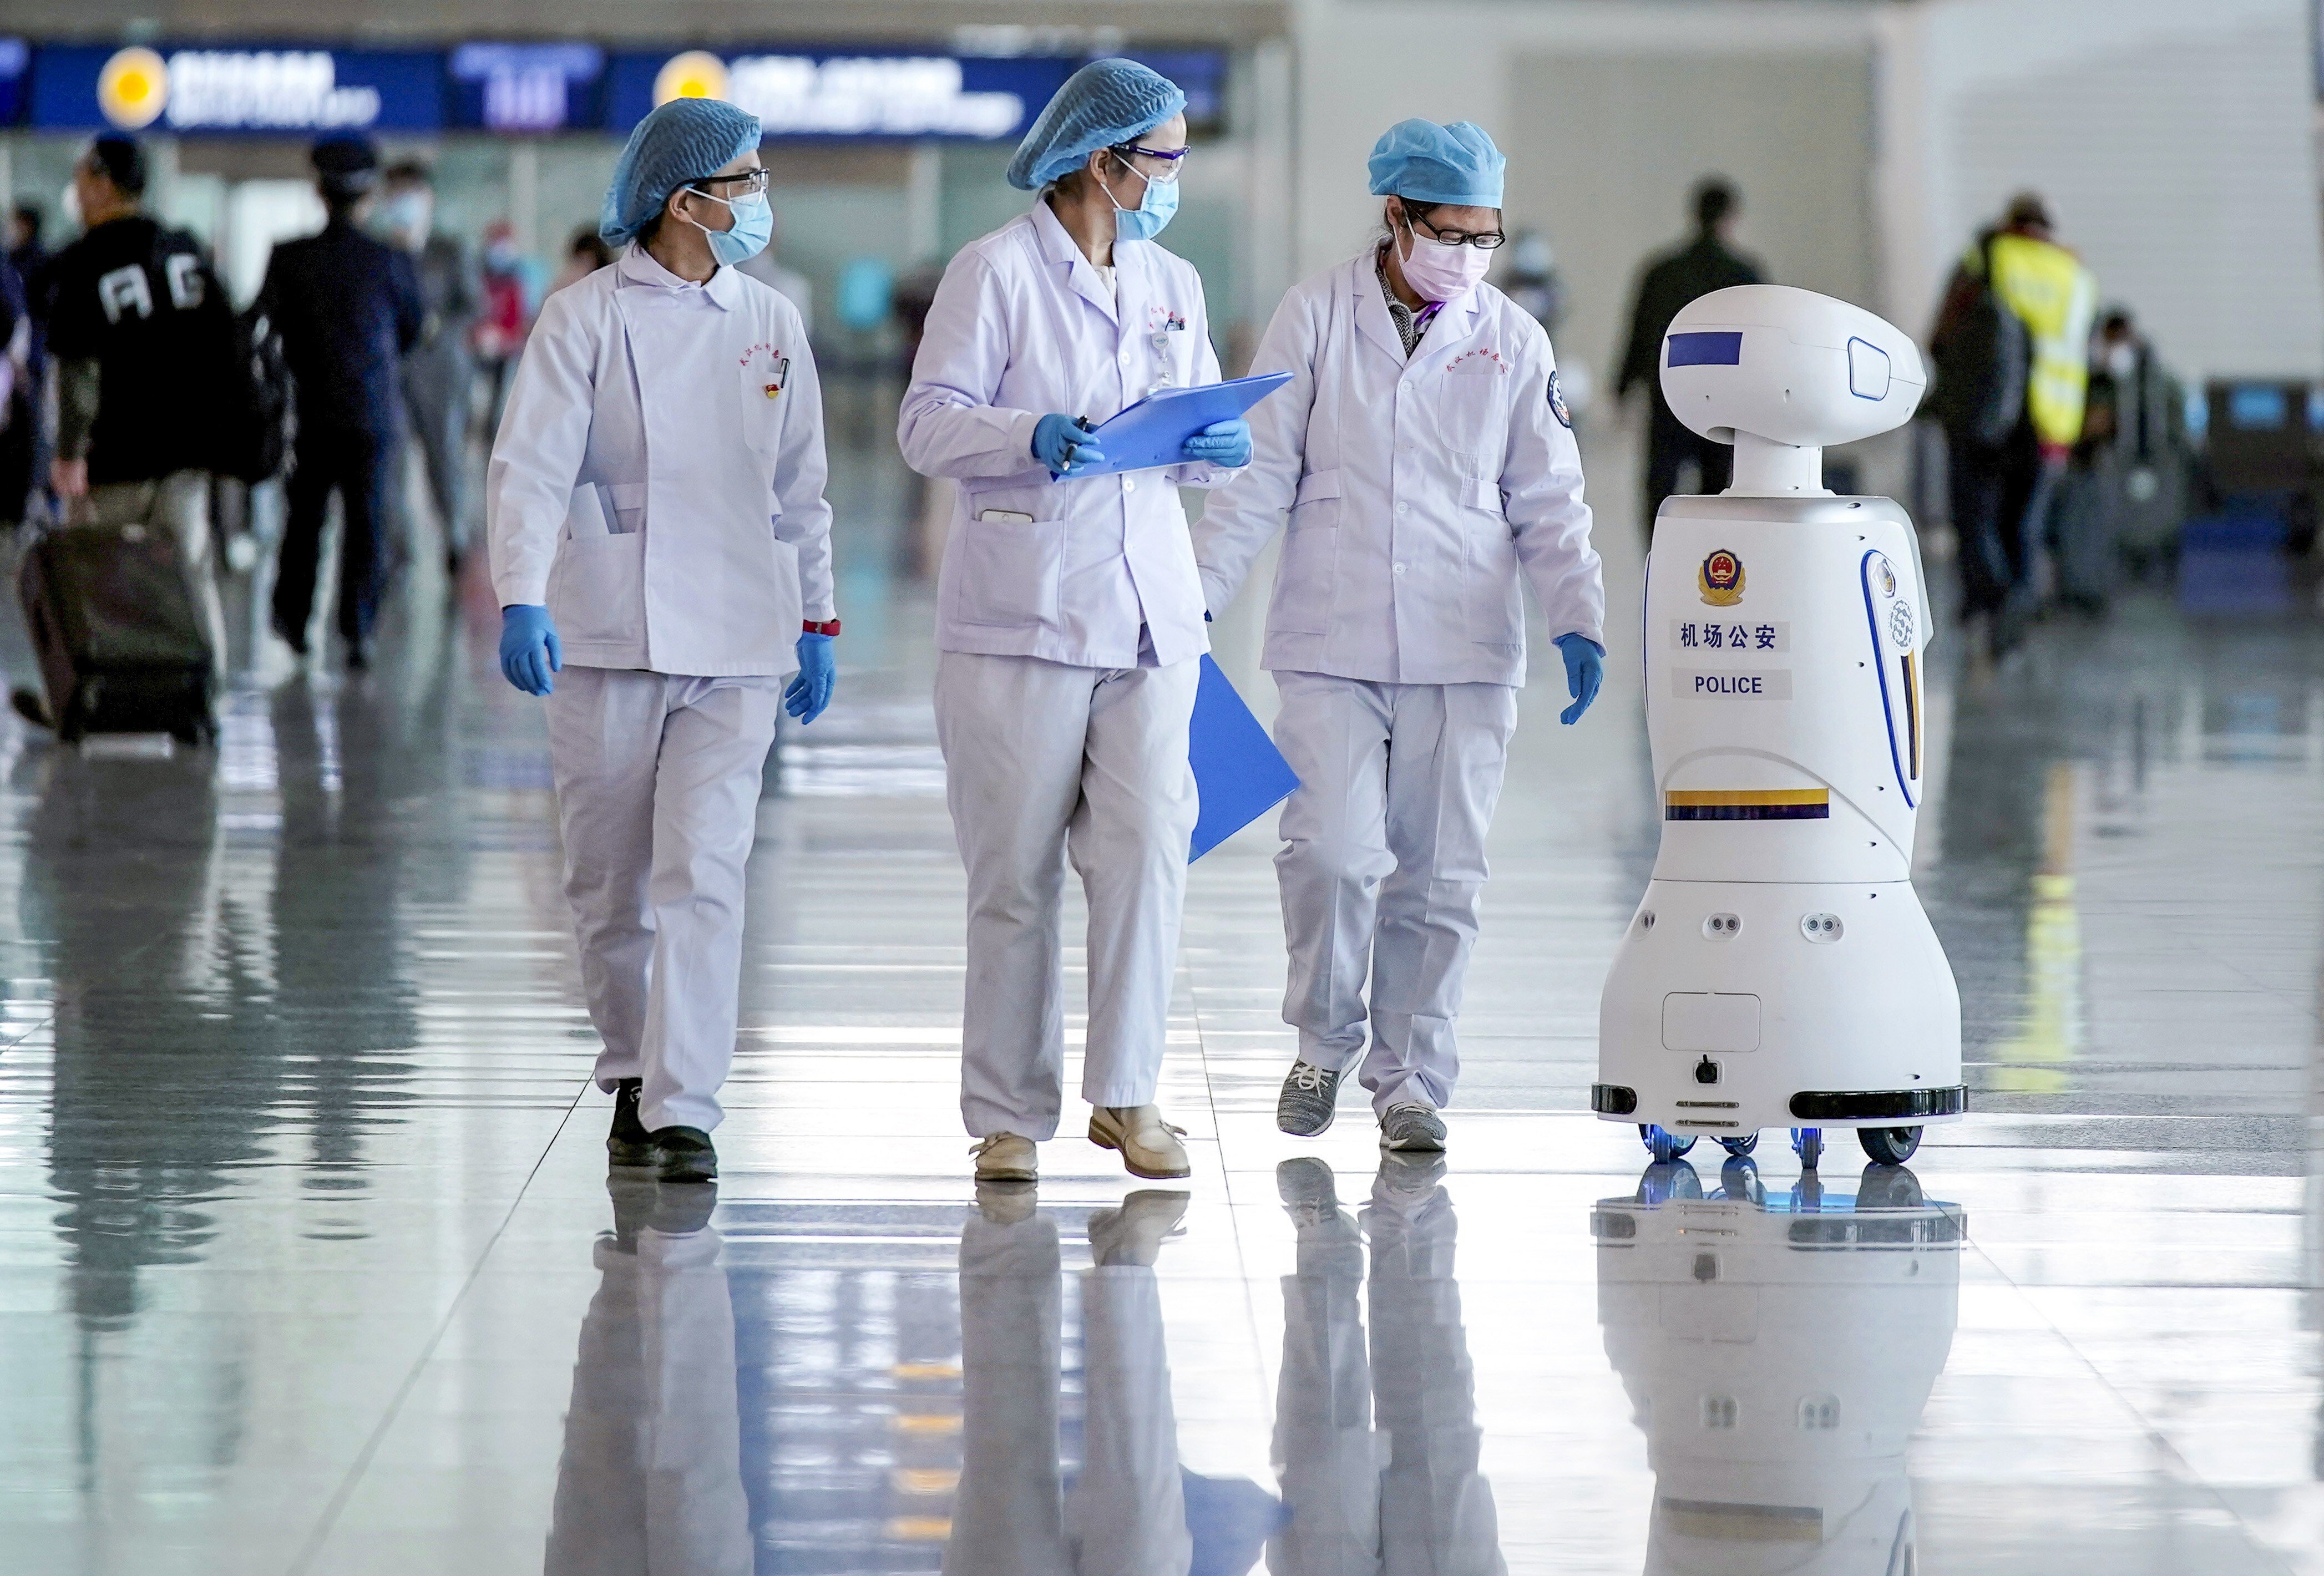 Medical workers walk by a police robot at the Wuhan Tianhe International Airport after travel restrictions to leave Wuhan, the capital of Hubei province and China's epicentre of the novel coronavirus disease (COVID-19) outbreak, were lifted, April 8, 2020. Photo: Reuters